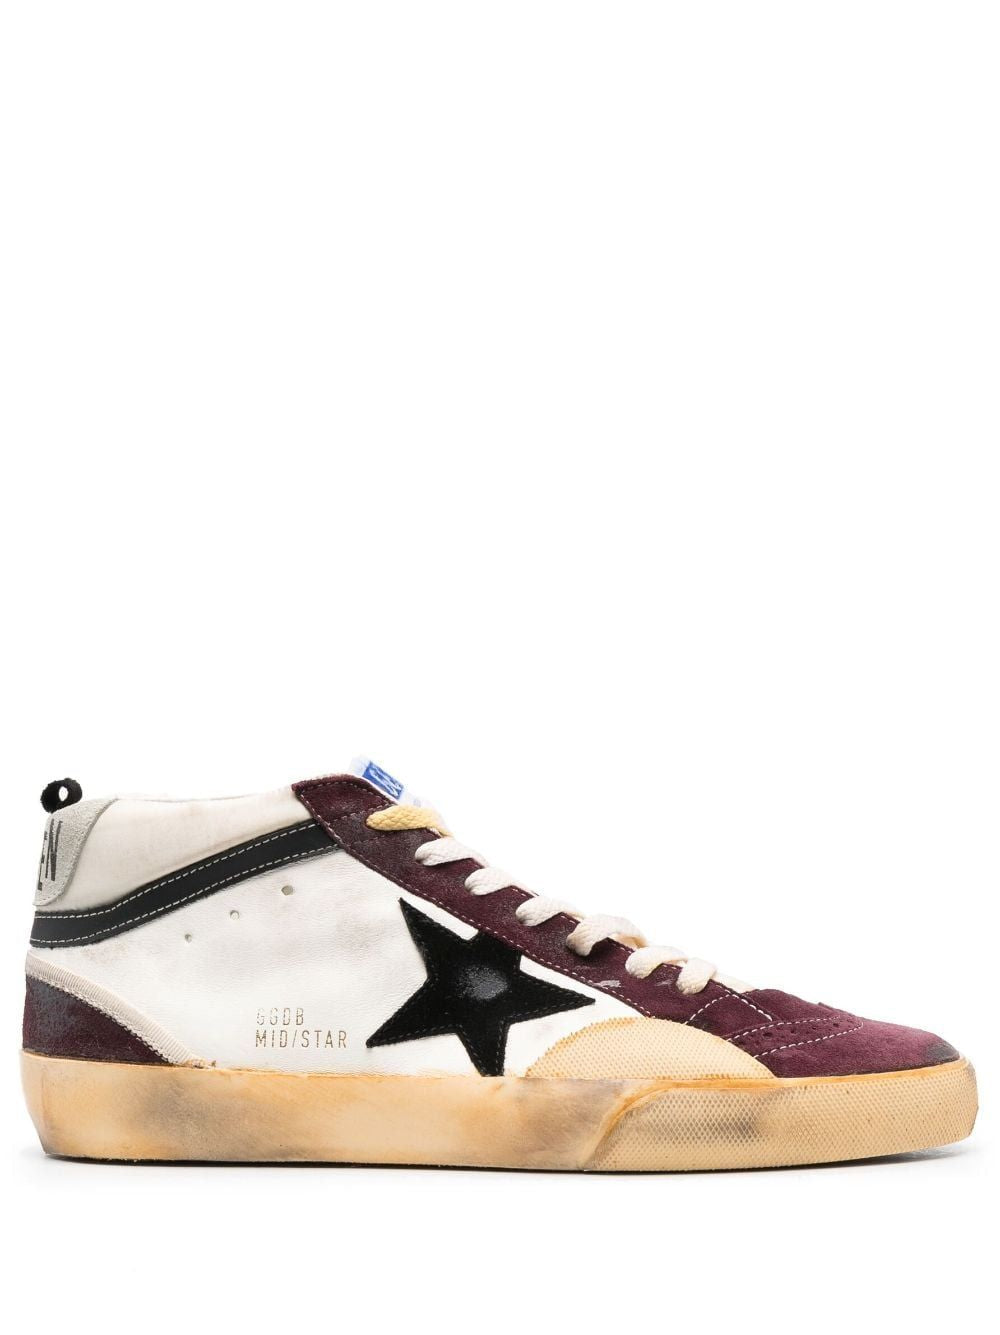 Men's Colorful Midstar Sneakers - FW23 Collection